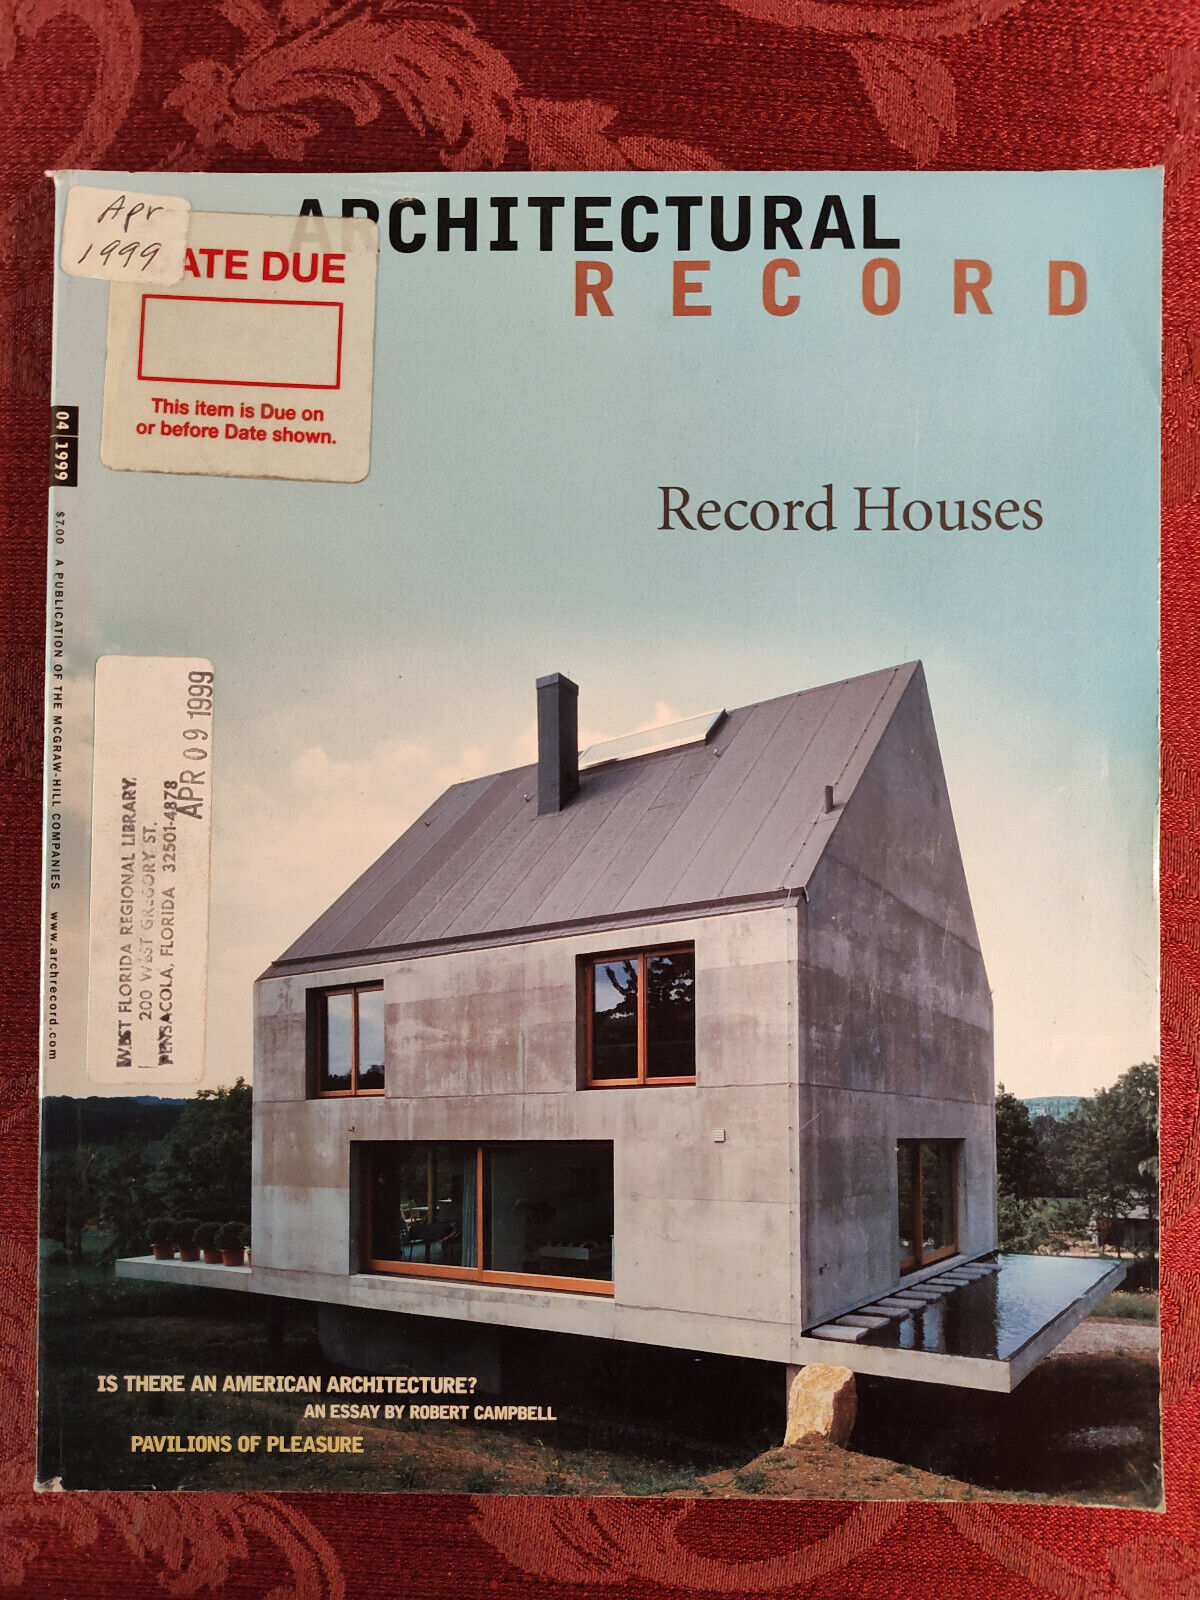 ARCHITECTURAL RECORD Magazine April 1999 Is There An American Architecture?